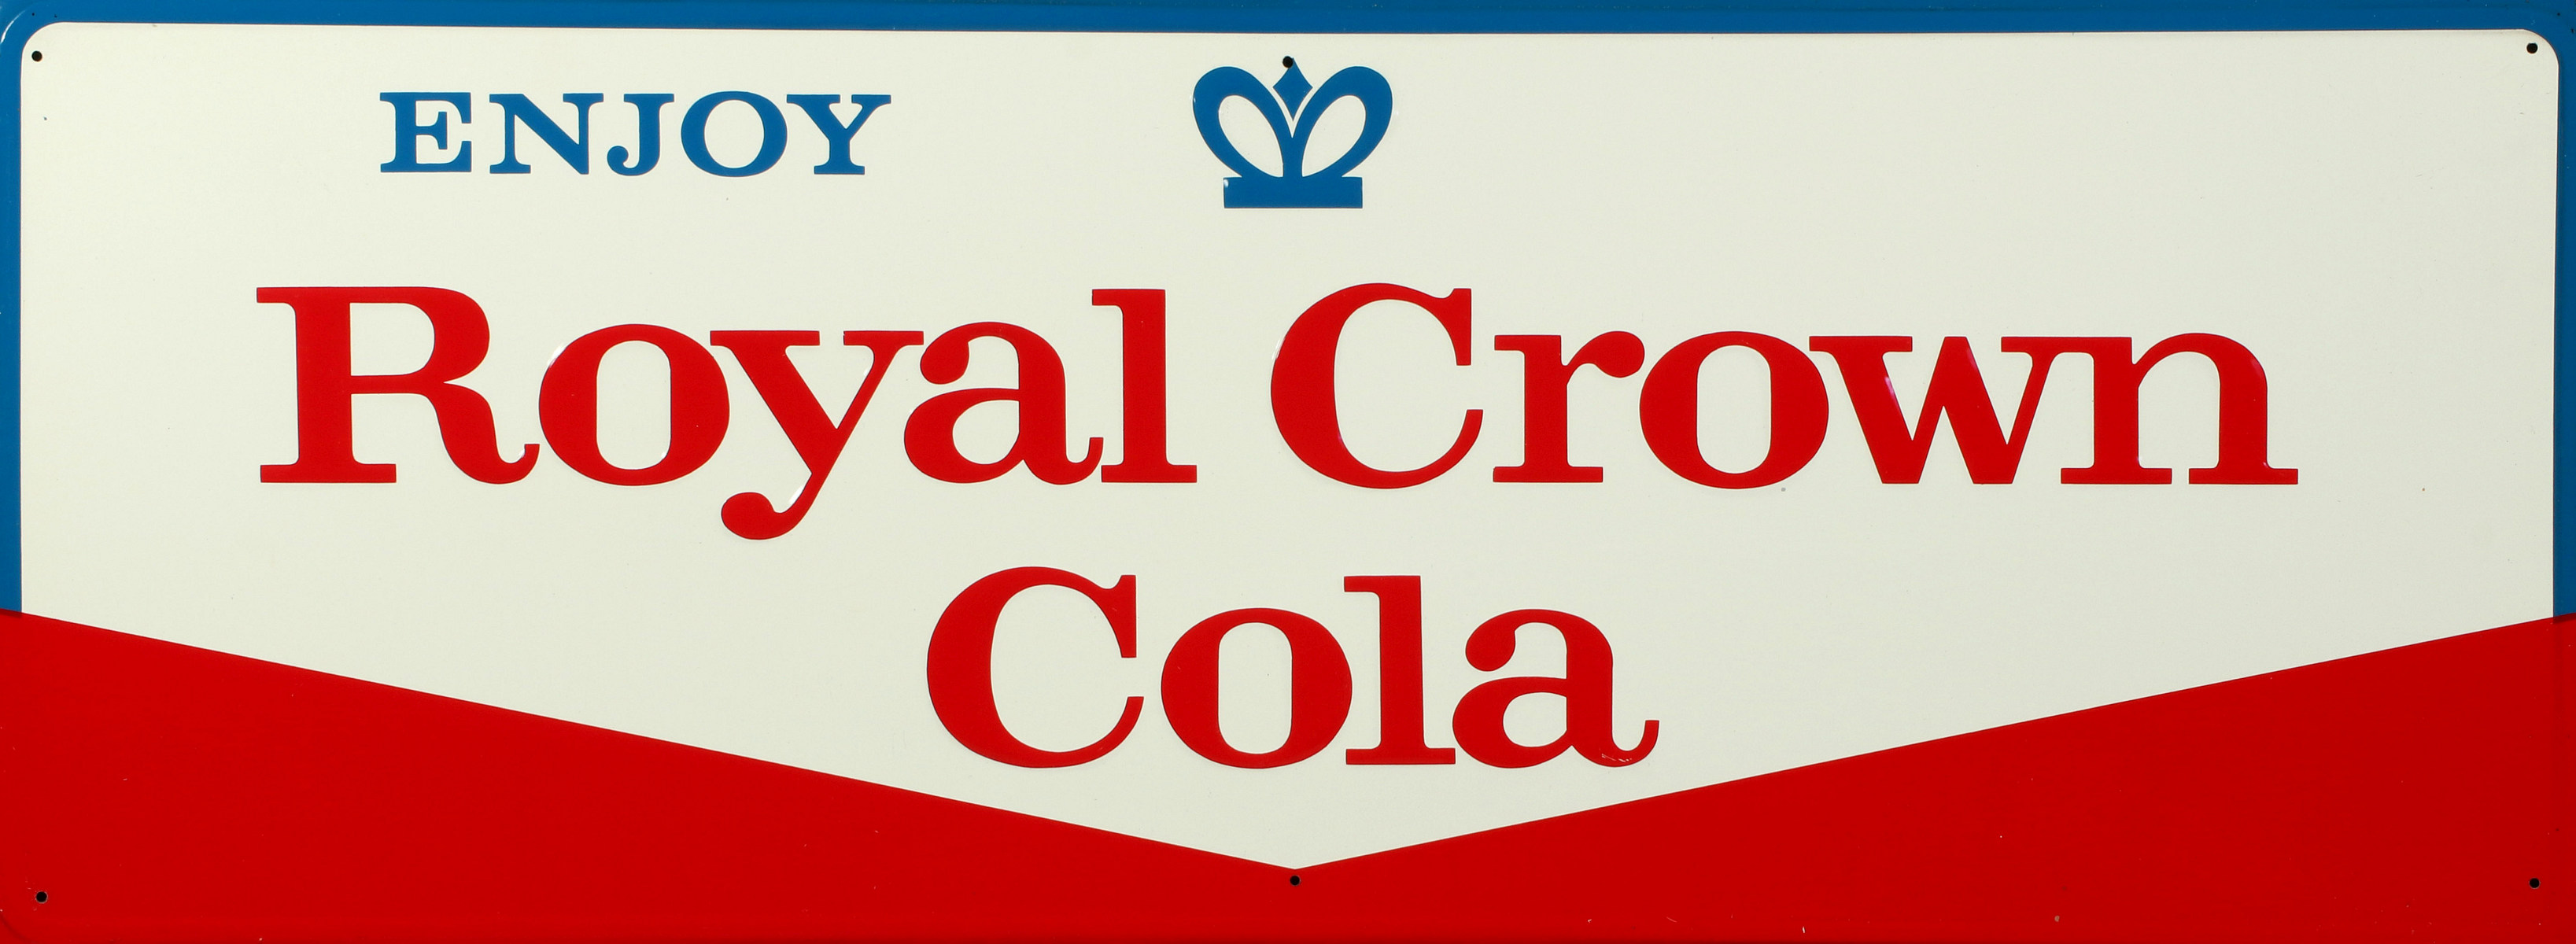 A BRIGHT RED, WHITE AND BLUE ROYAL CROWN COLA SIGN